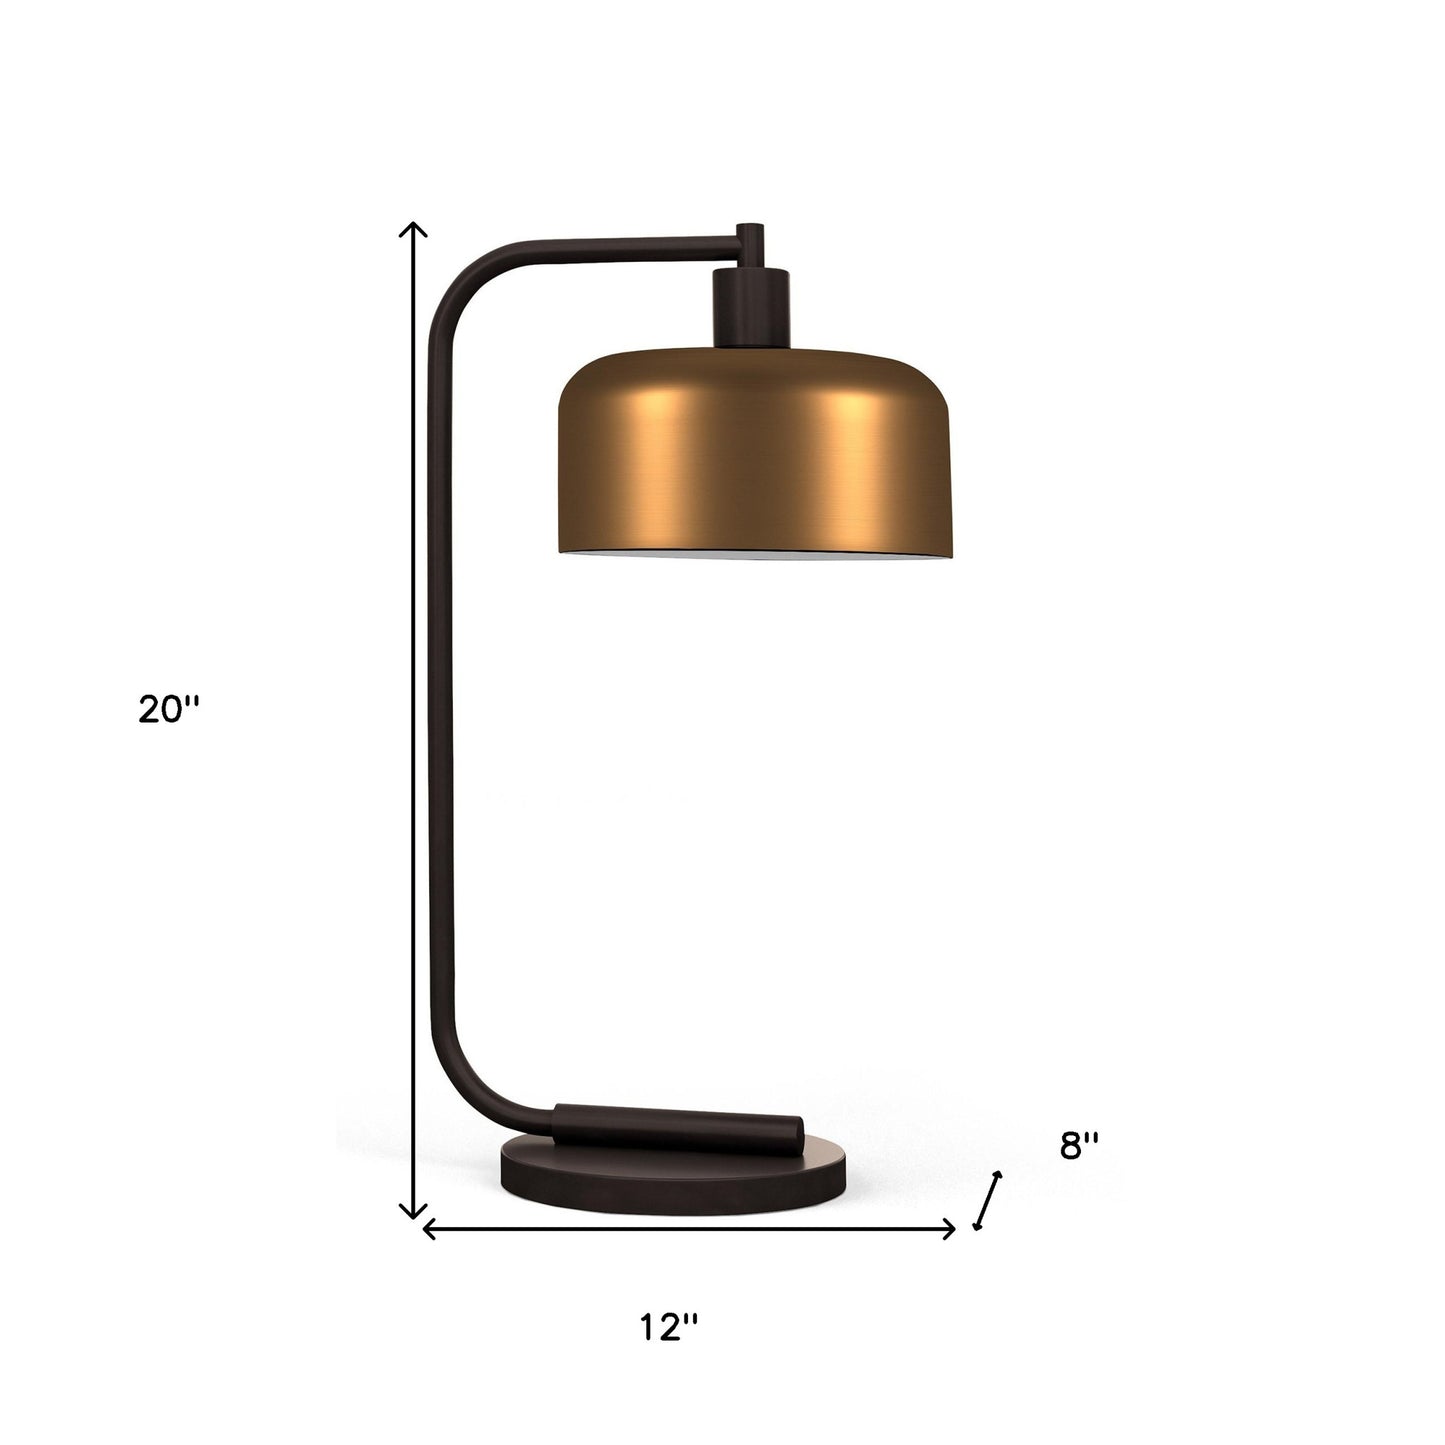 20" Black Metal Arched Table Lamp With Brass Bowl Shade